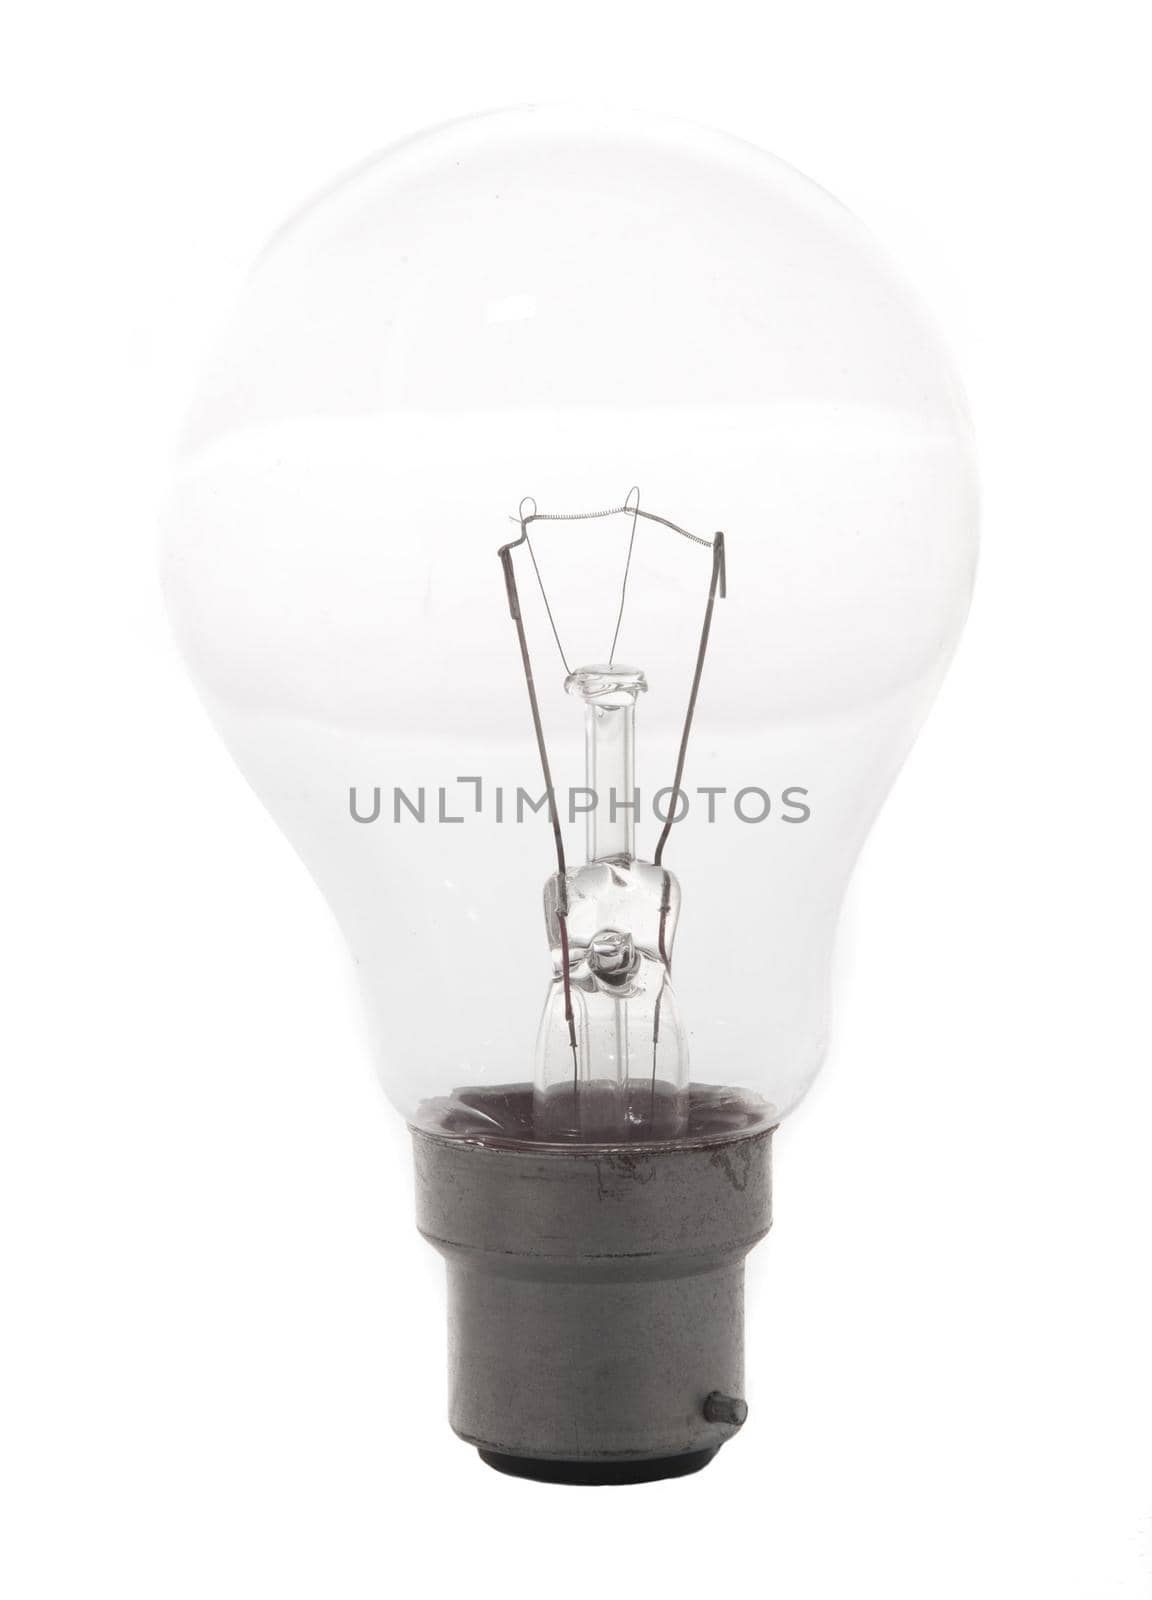 Traditional household glass incandescent light bulb on with bayonet fitting isolated on a white background in a power and energy concept